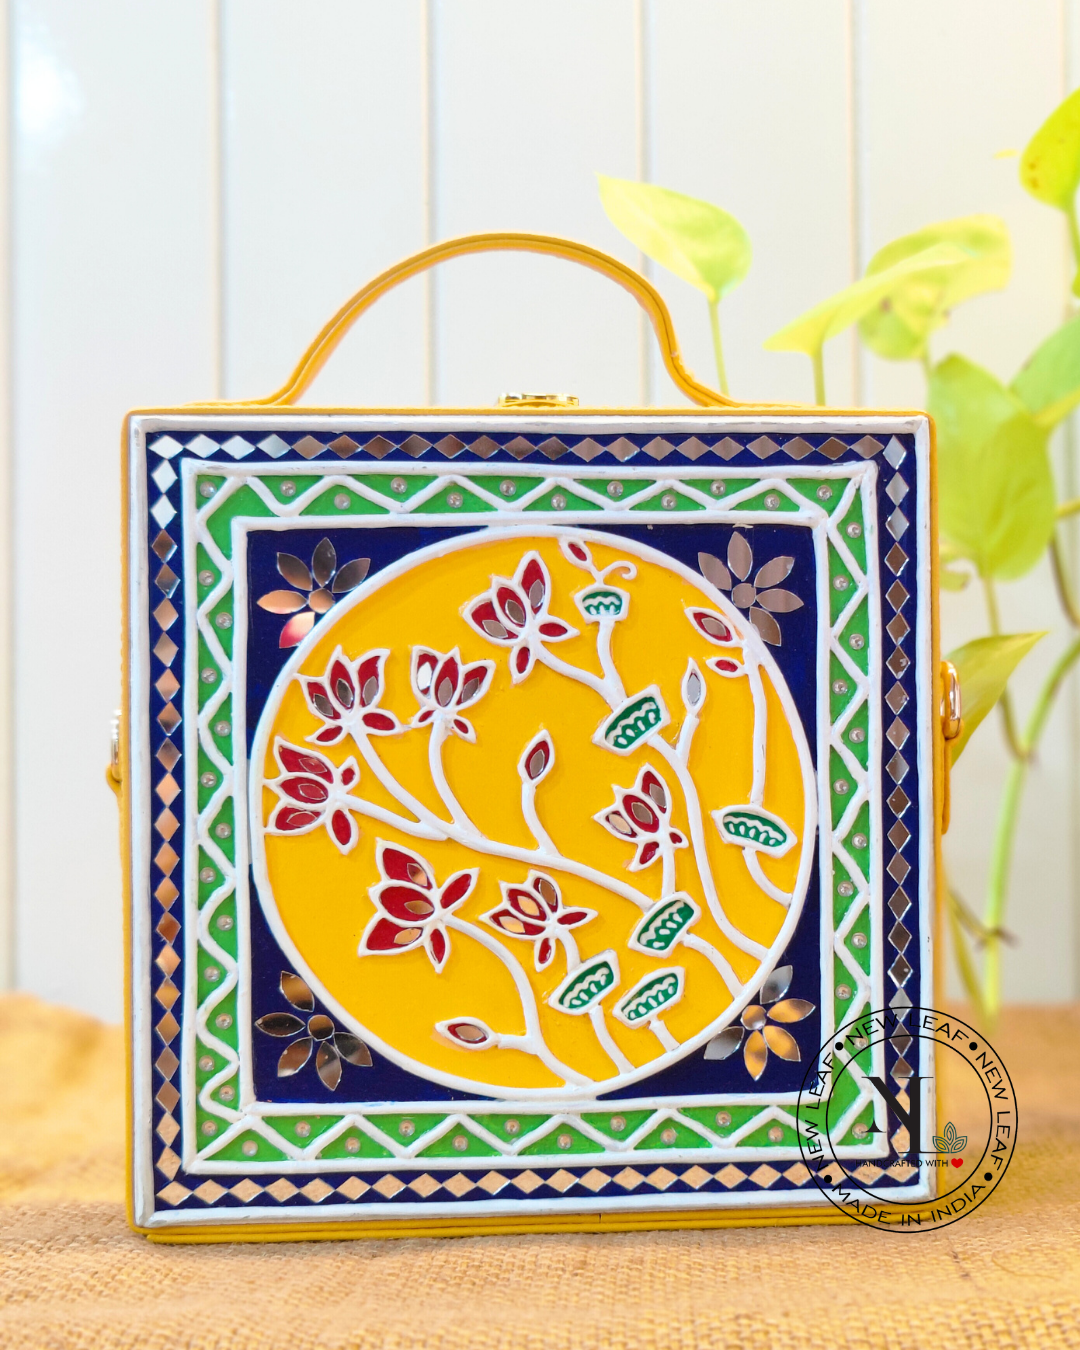 Floral Lippan Art Handcrafted Square Box Bag